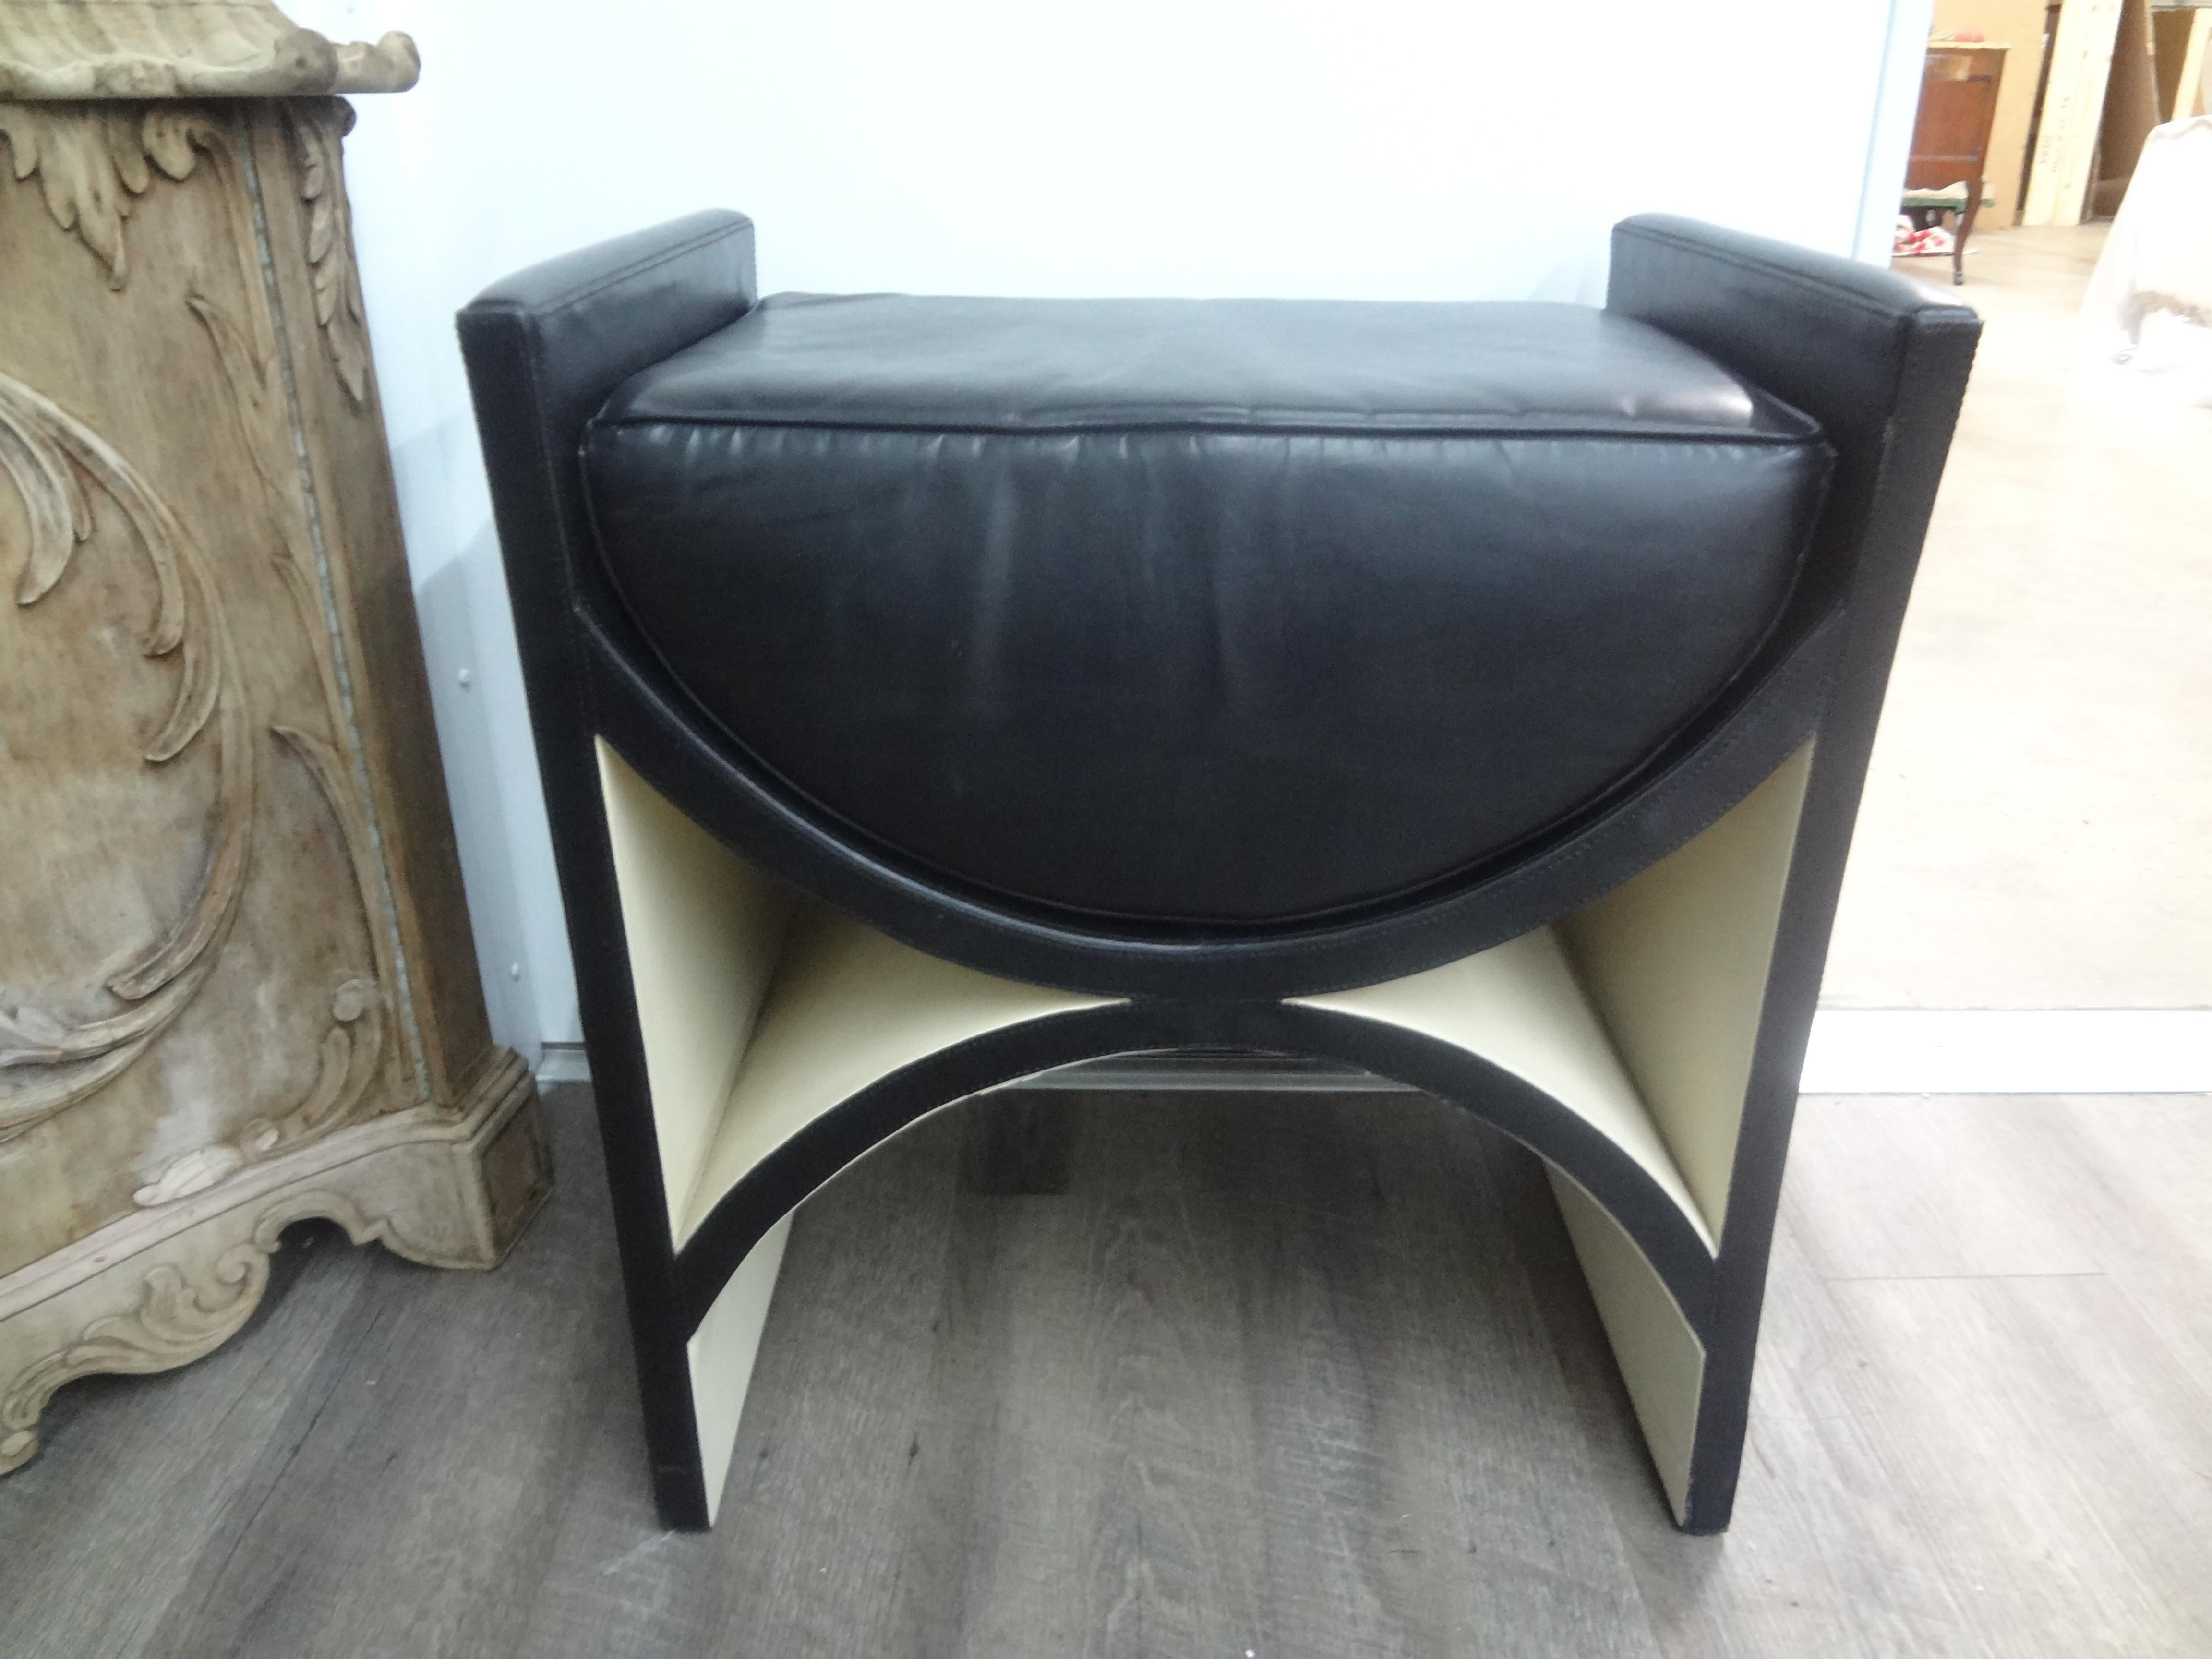 Italian postmodern leather bench.
This stunning and sculptural Italian bench is most interesting and comfortable.
This great Roche Bobois style bench is perfect for extra seating or use as a vanity stool.
Visually interesting!